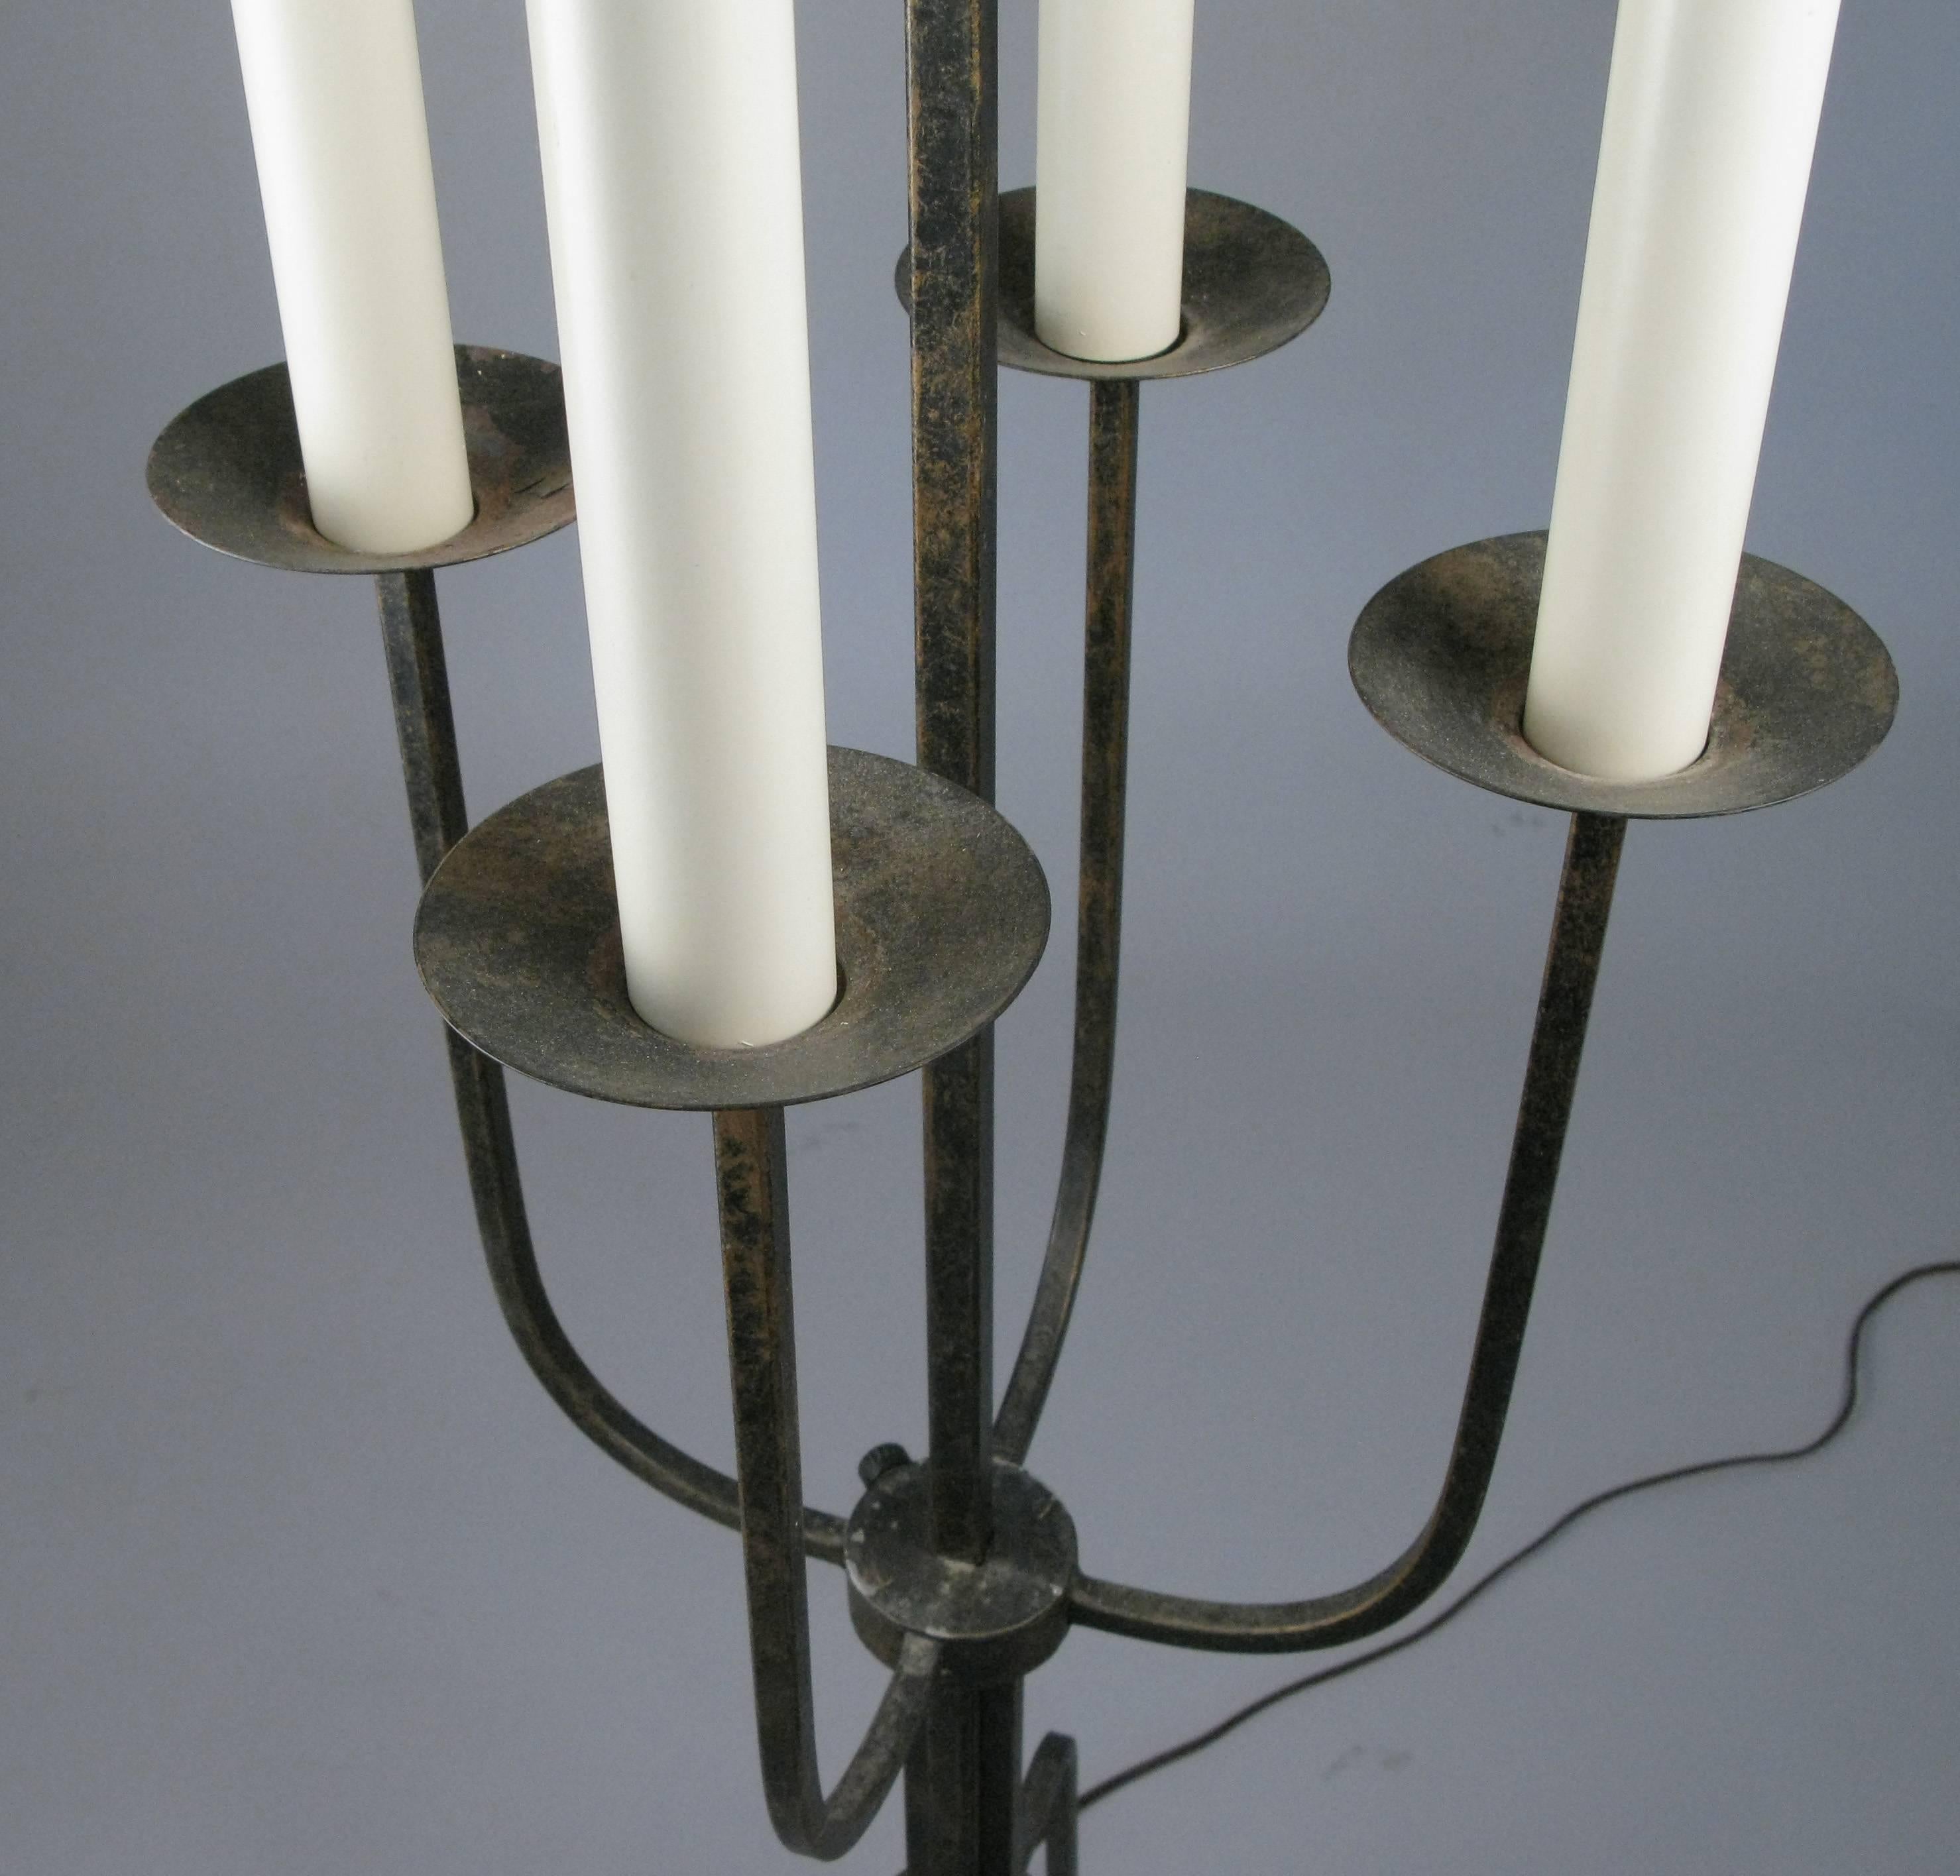 Mid-20th Century 1940's Modern Floor Lamp by Tommi Parzinger